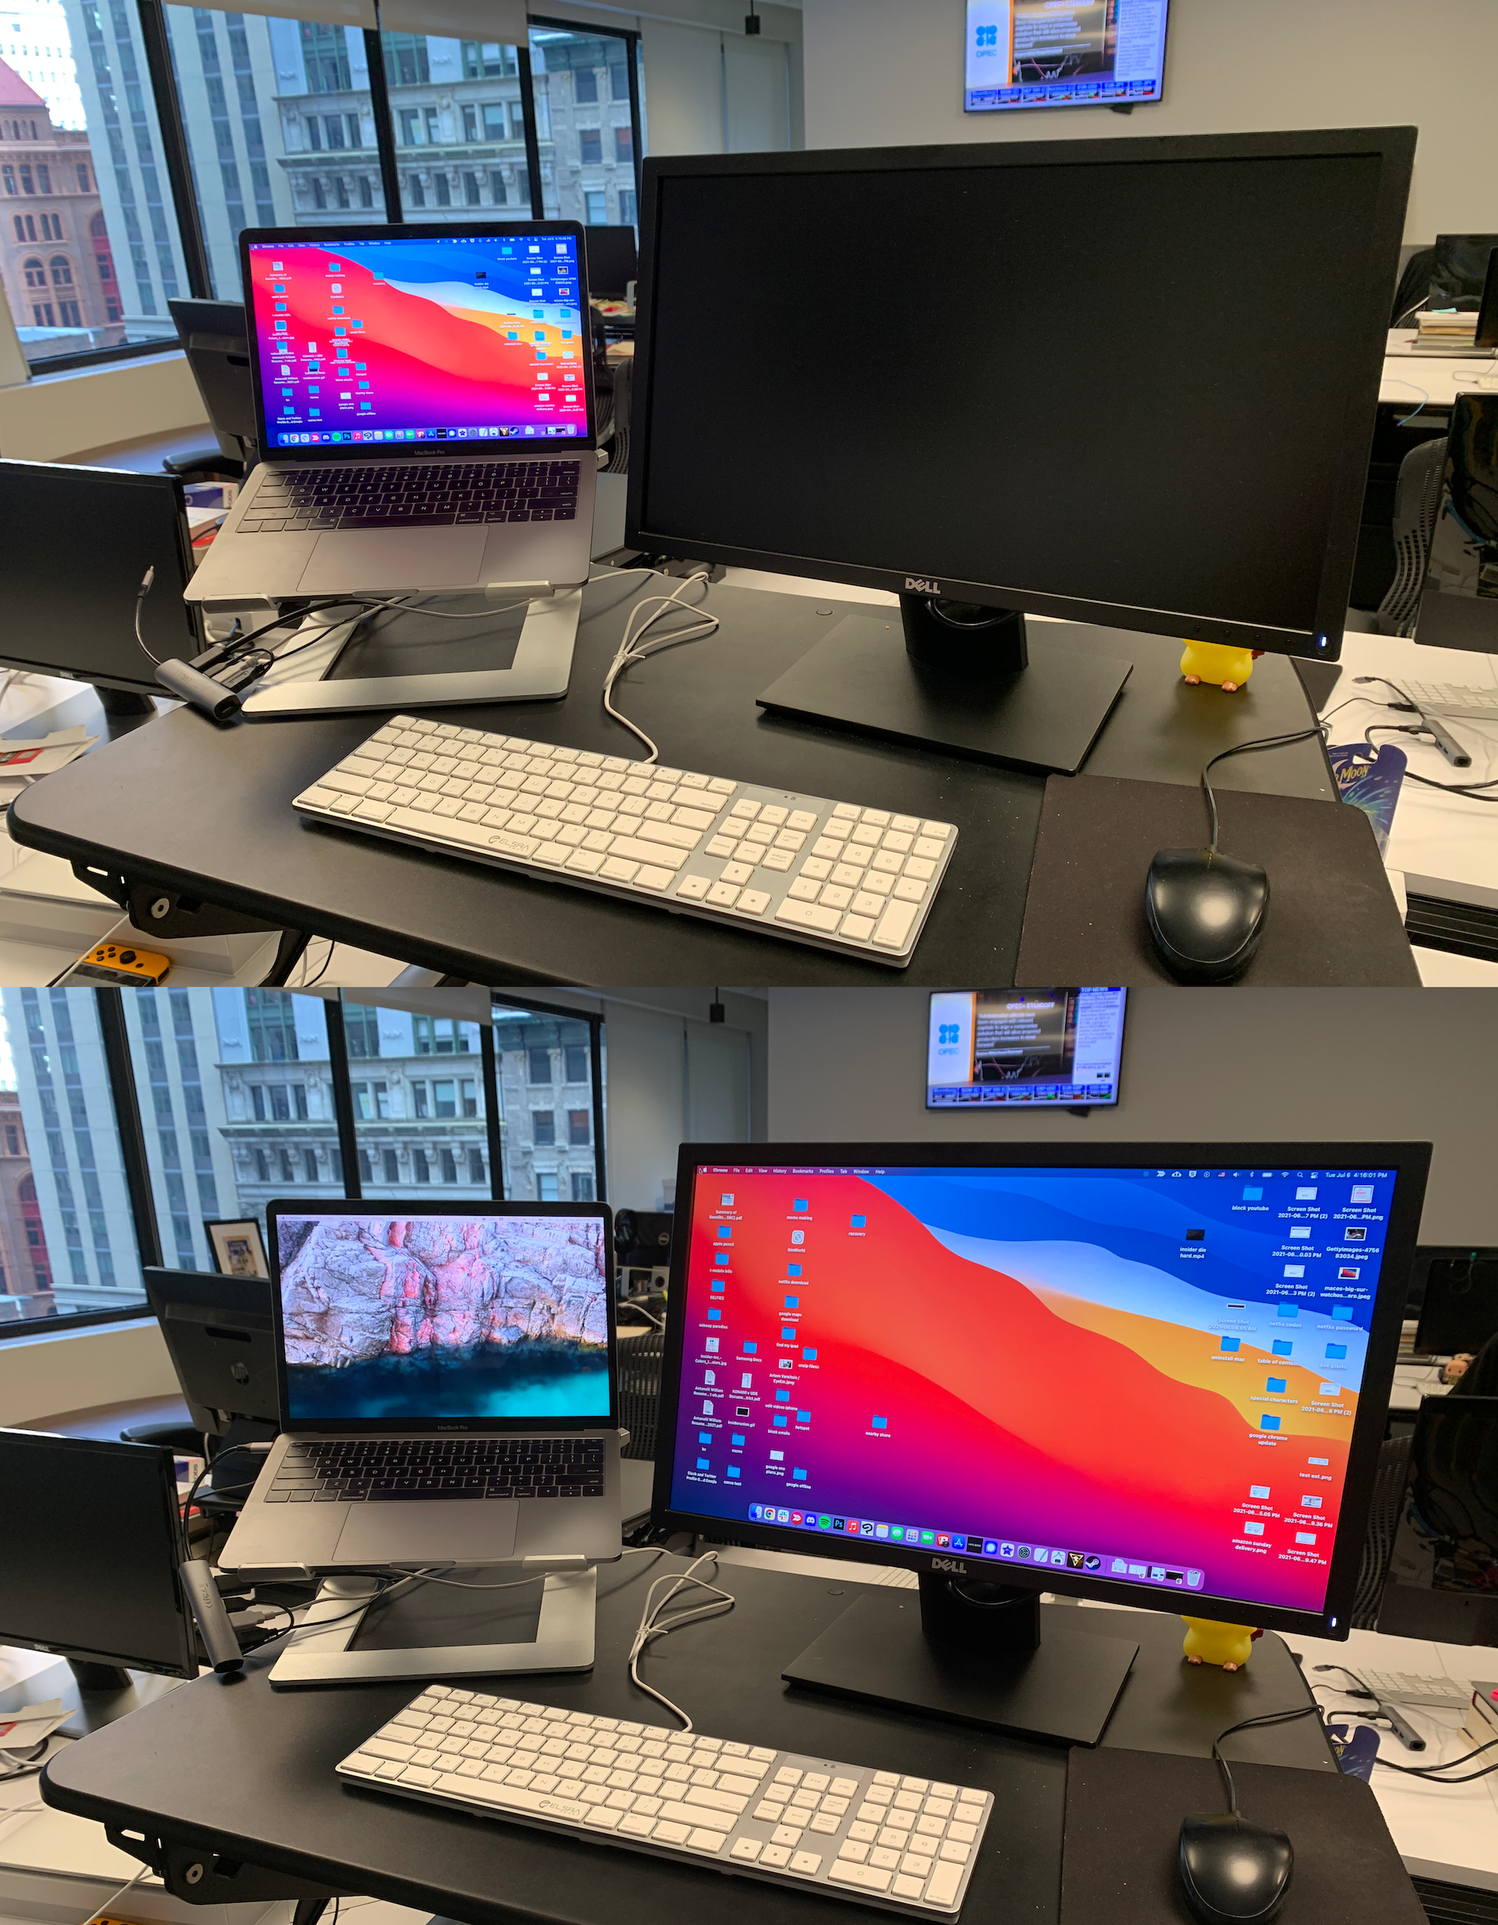 Two pictures on top of each other. The top picture shows a Mac laptop next to a black screened monitor. The bottom image shows the same Mac laptop, but its screen has now been extended onto the monitor.